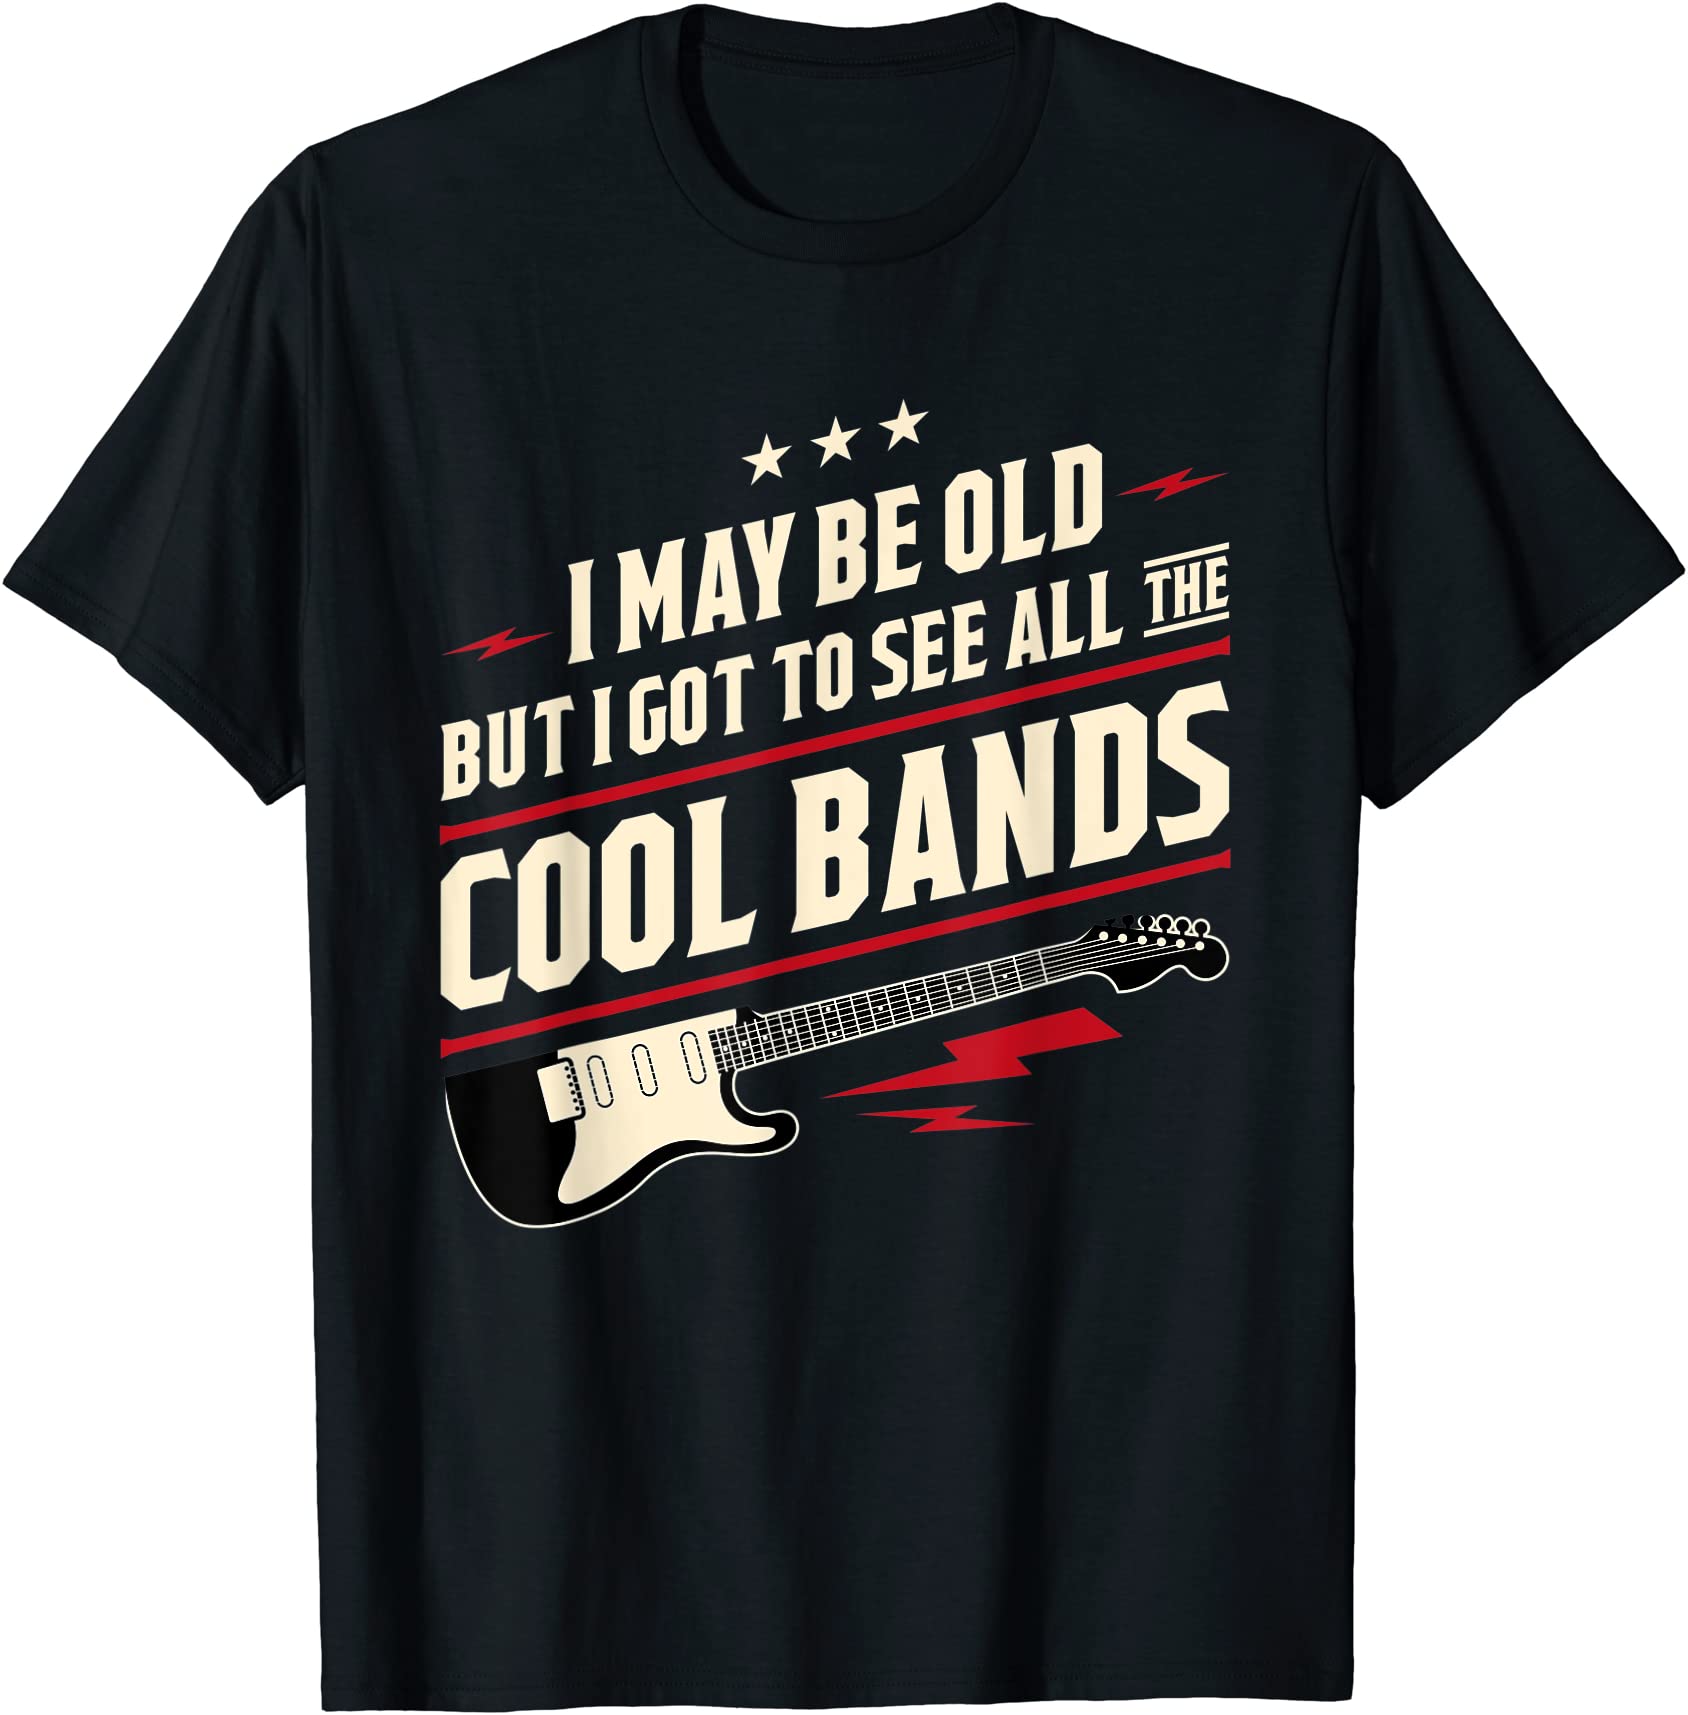 i may be old but i got to see all the cool bands t shirt men - Buy t ...